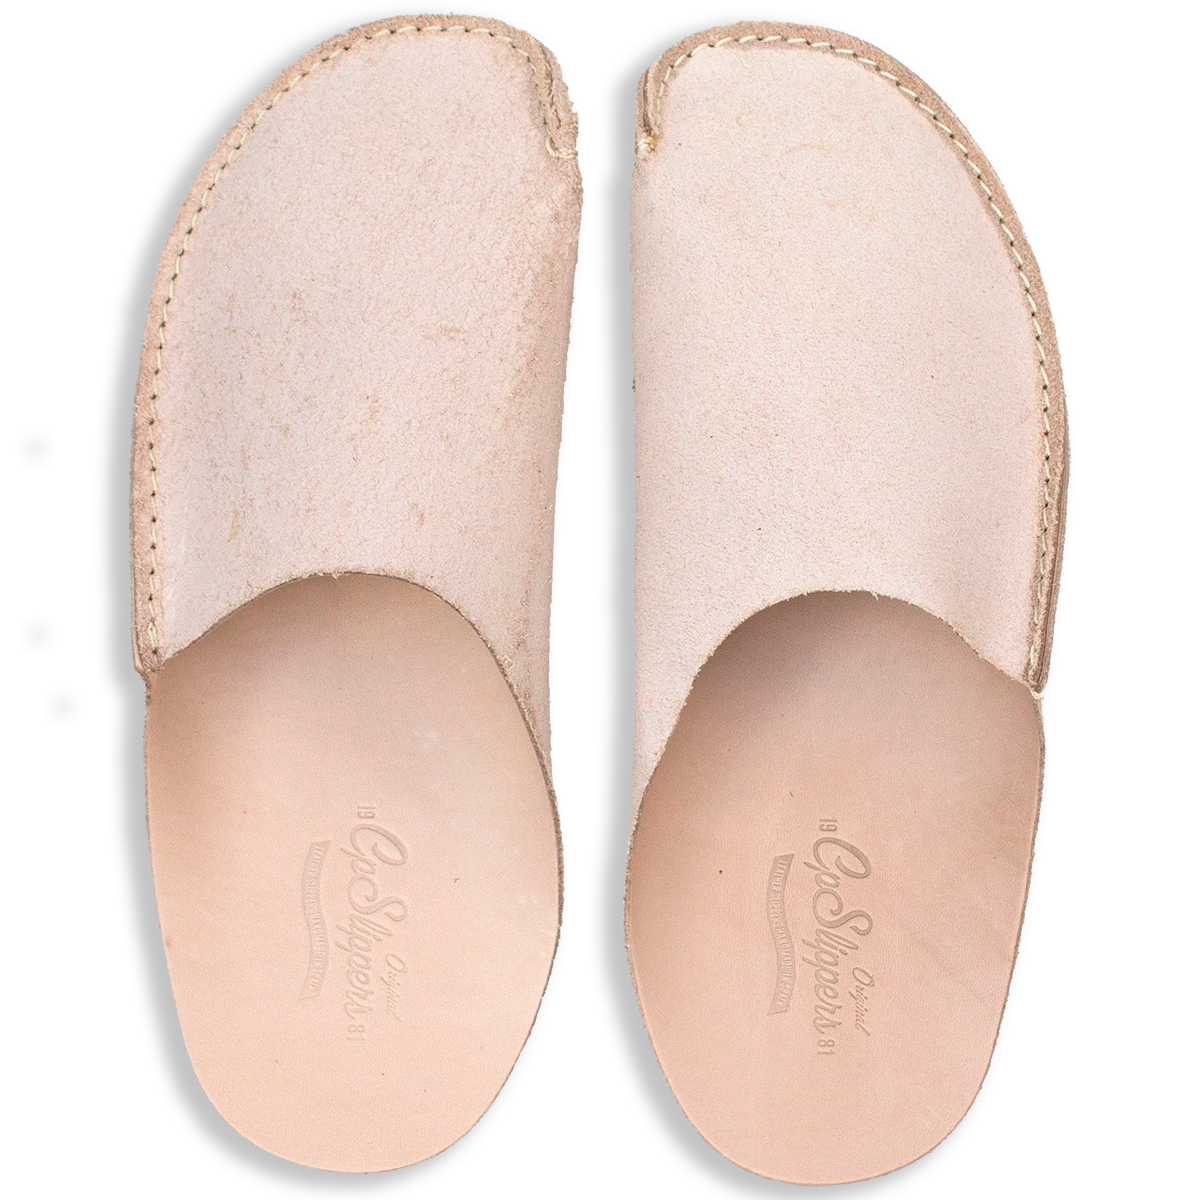 CP Slippers natural veg-tan un dyed leather minimalist home shoes